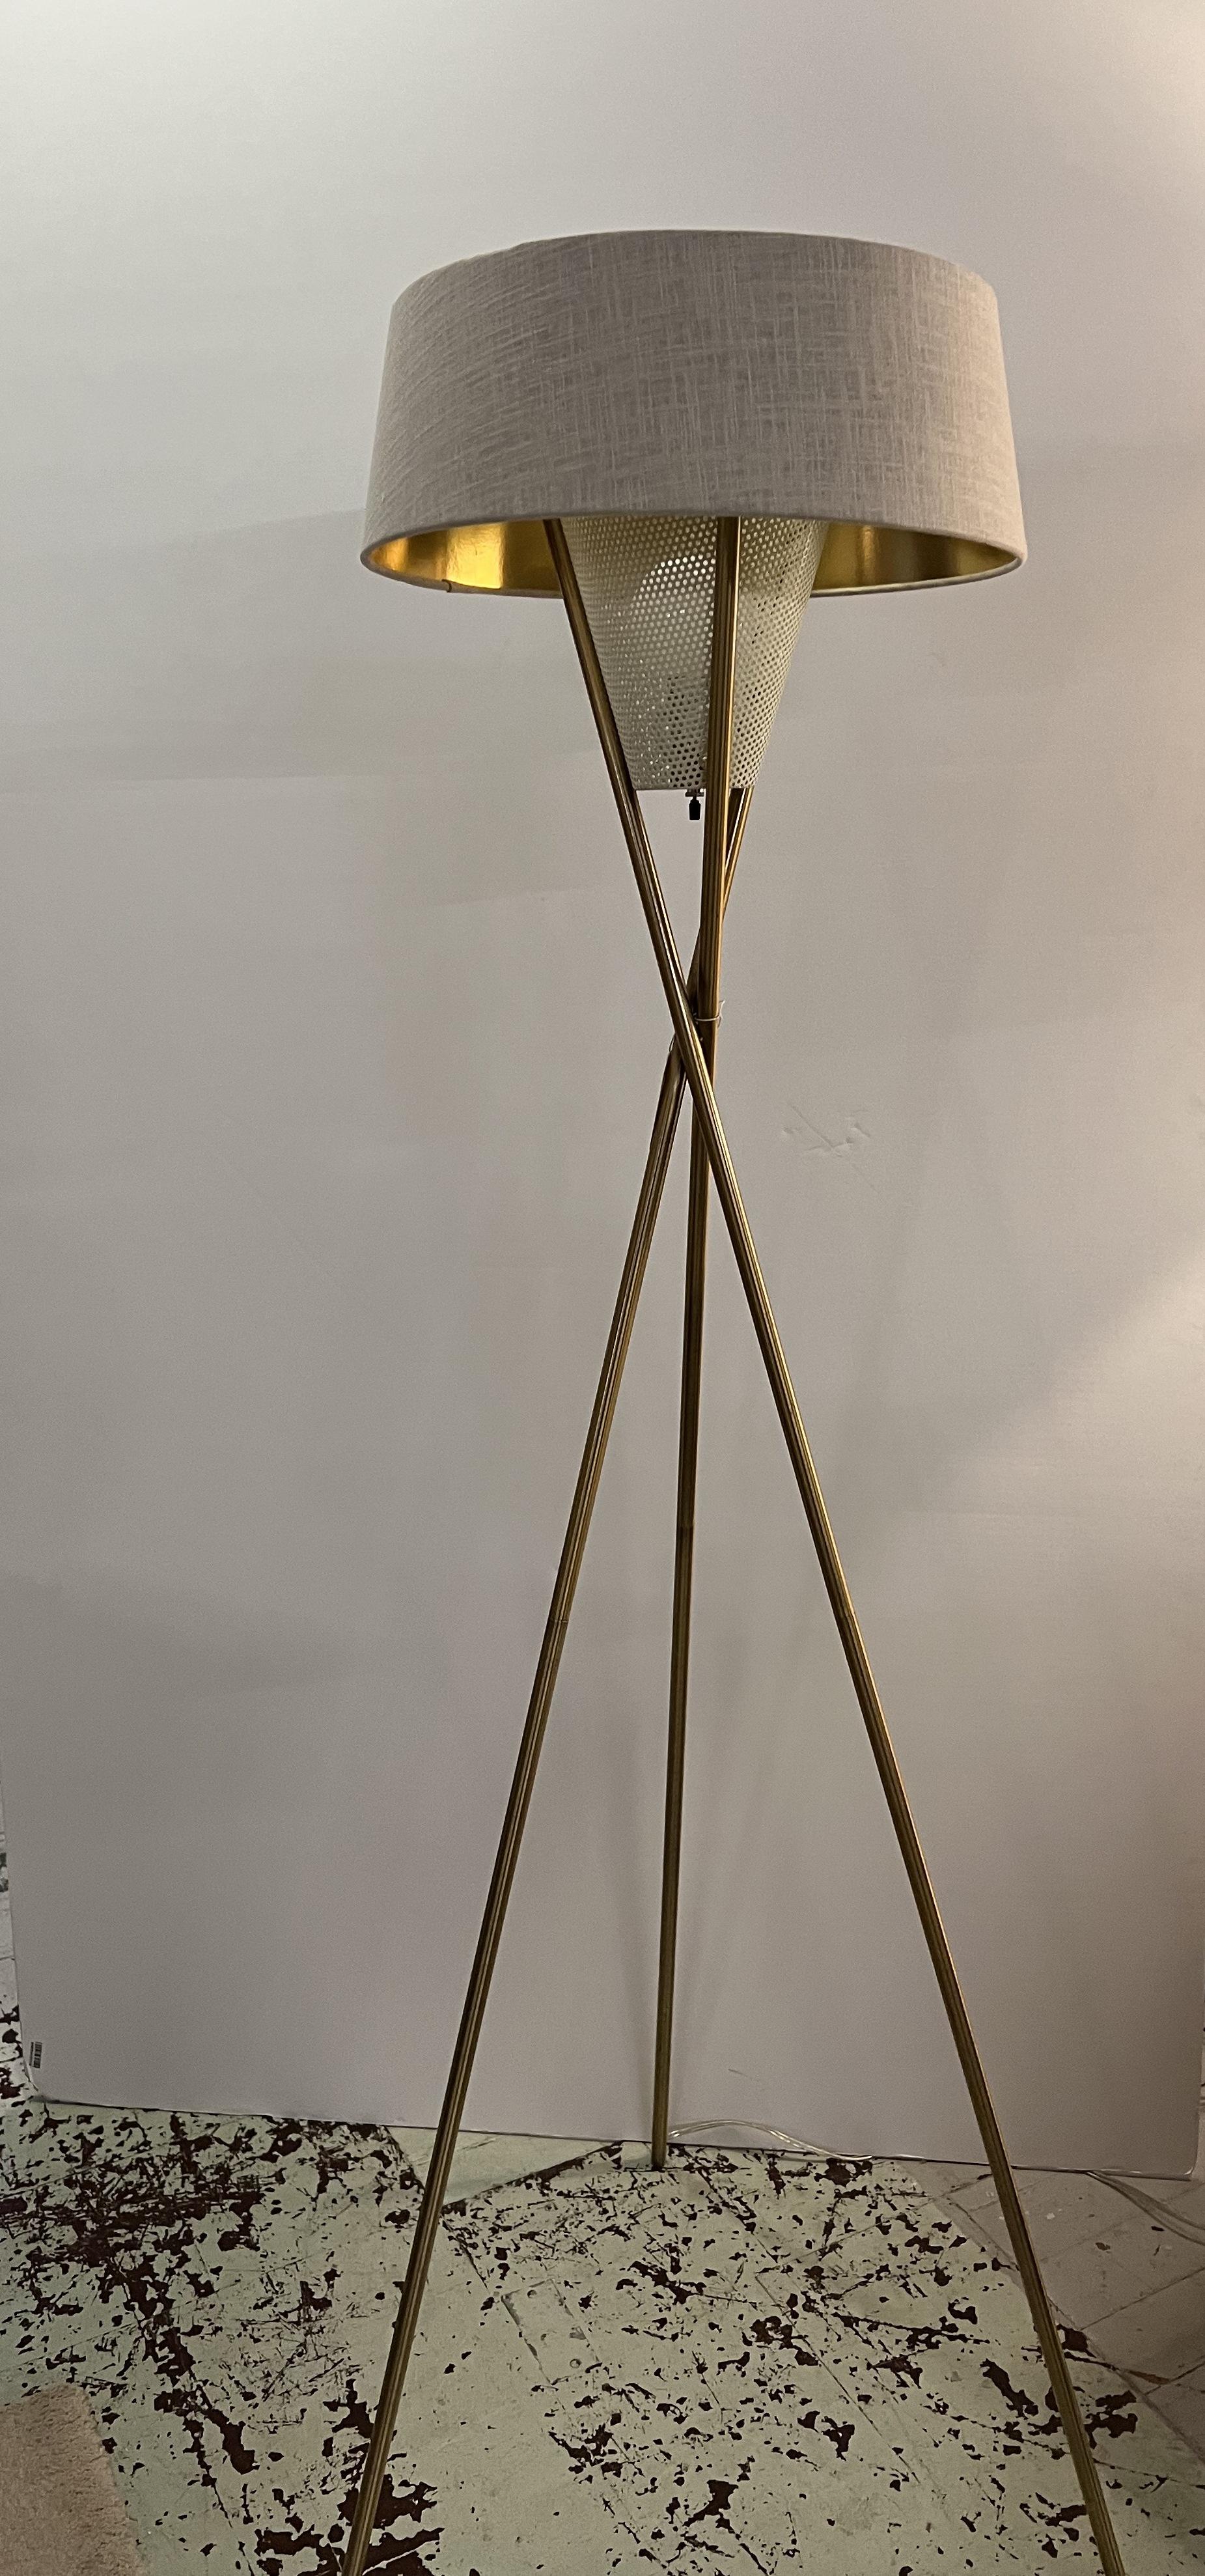 French 1950s floor lamp with three long crossed spear-like rods and a perforated metal light cover.
The shade has been redone in off-white fabric with gold paper inside matching the base.